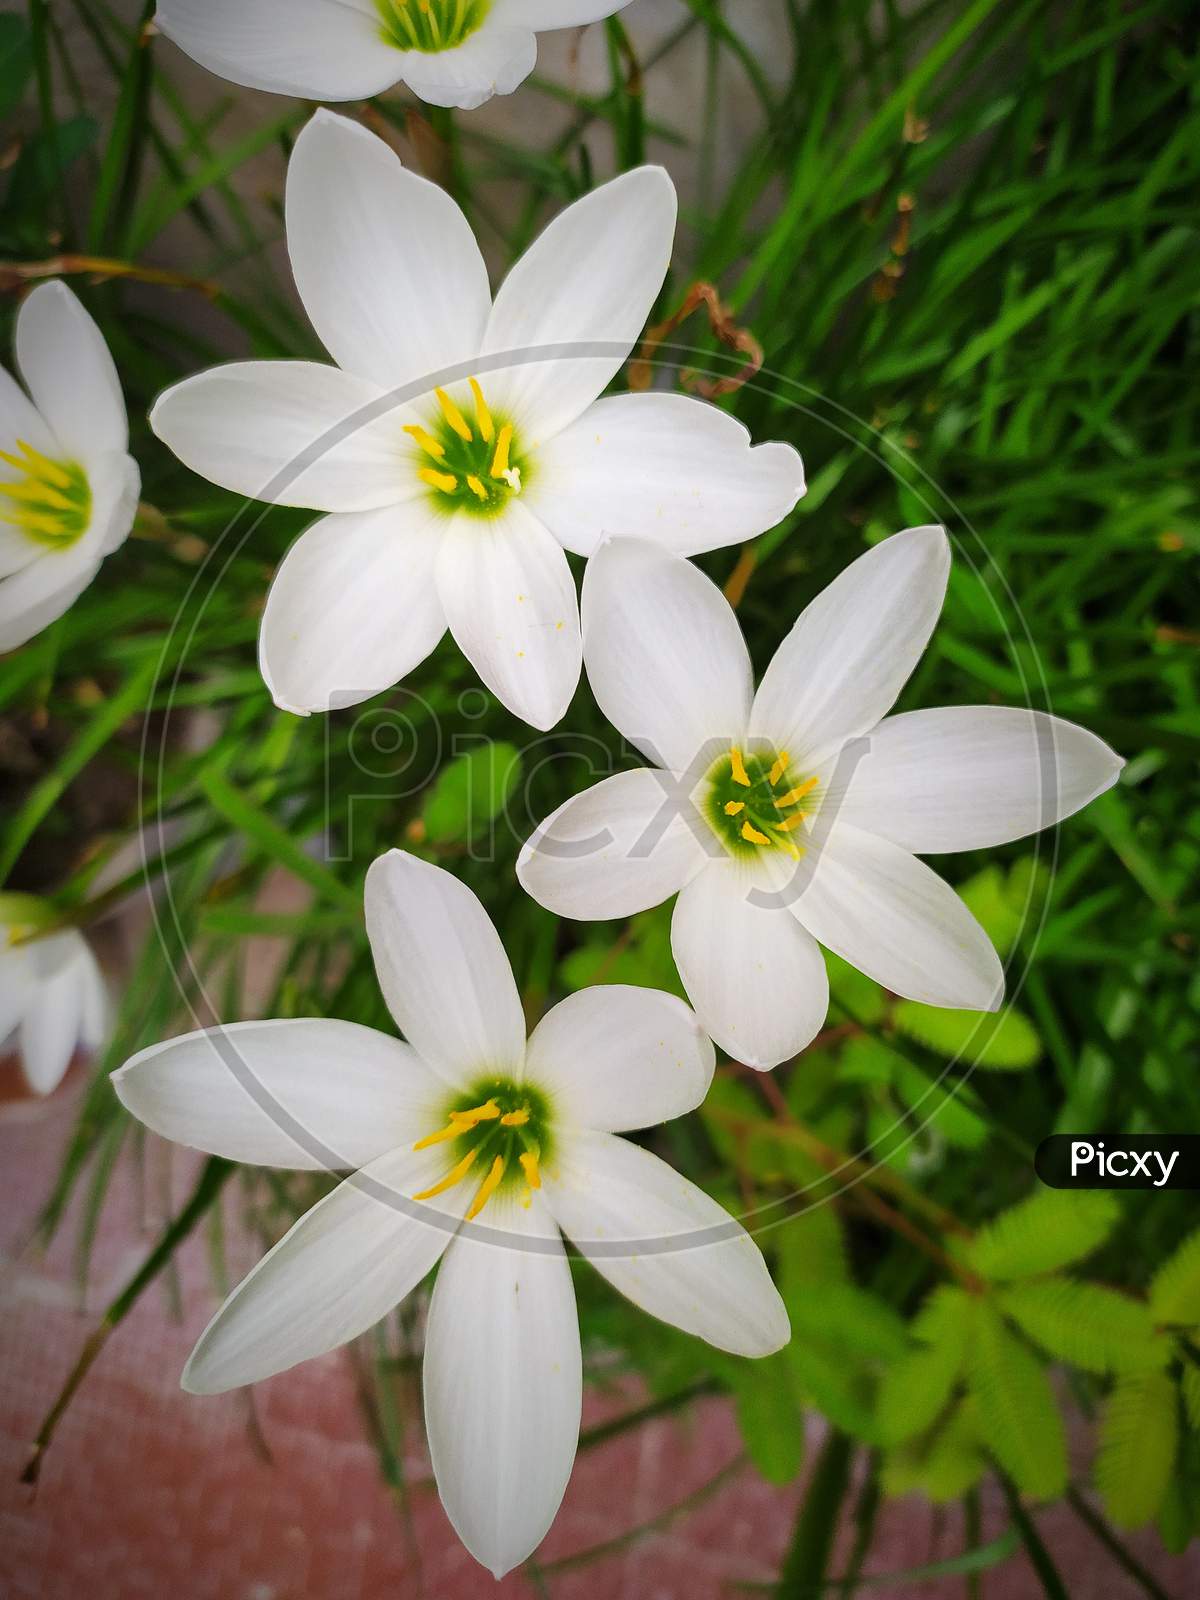 Zephyranthes candida flowers topview. common names are autumn zephyrlily, white windflower and Peruvian swamp lily. A species of rain lily